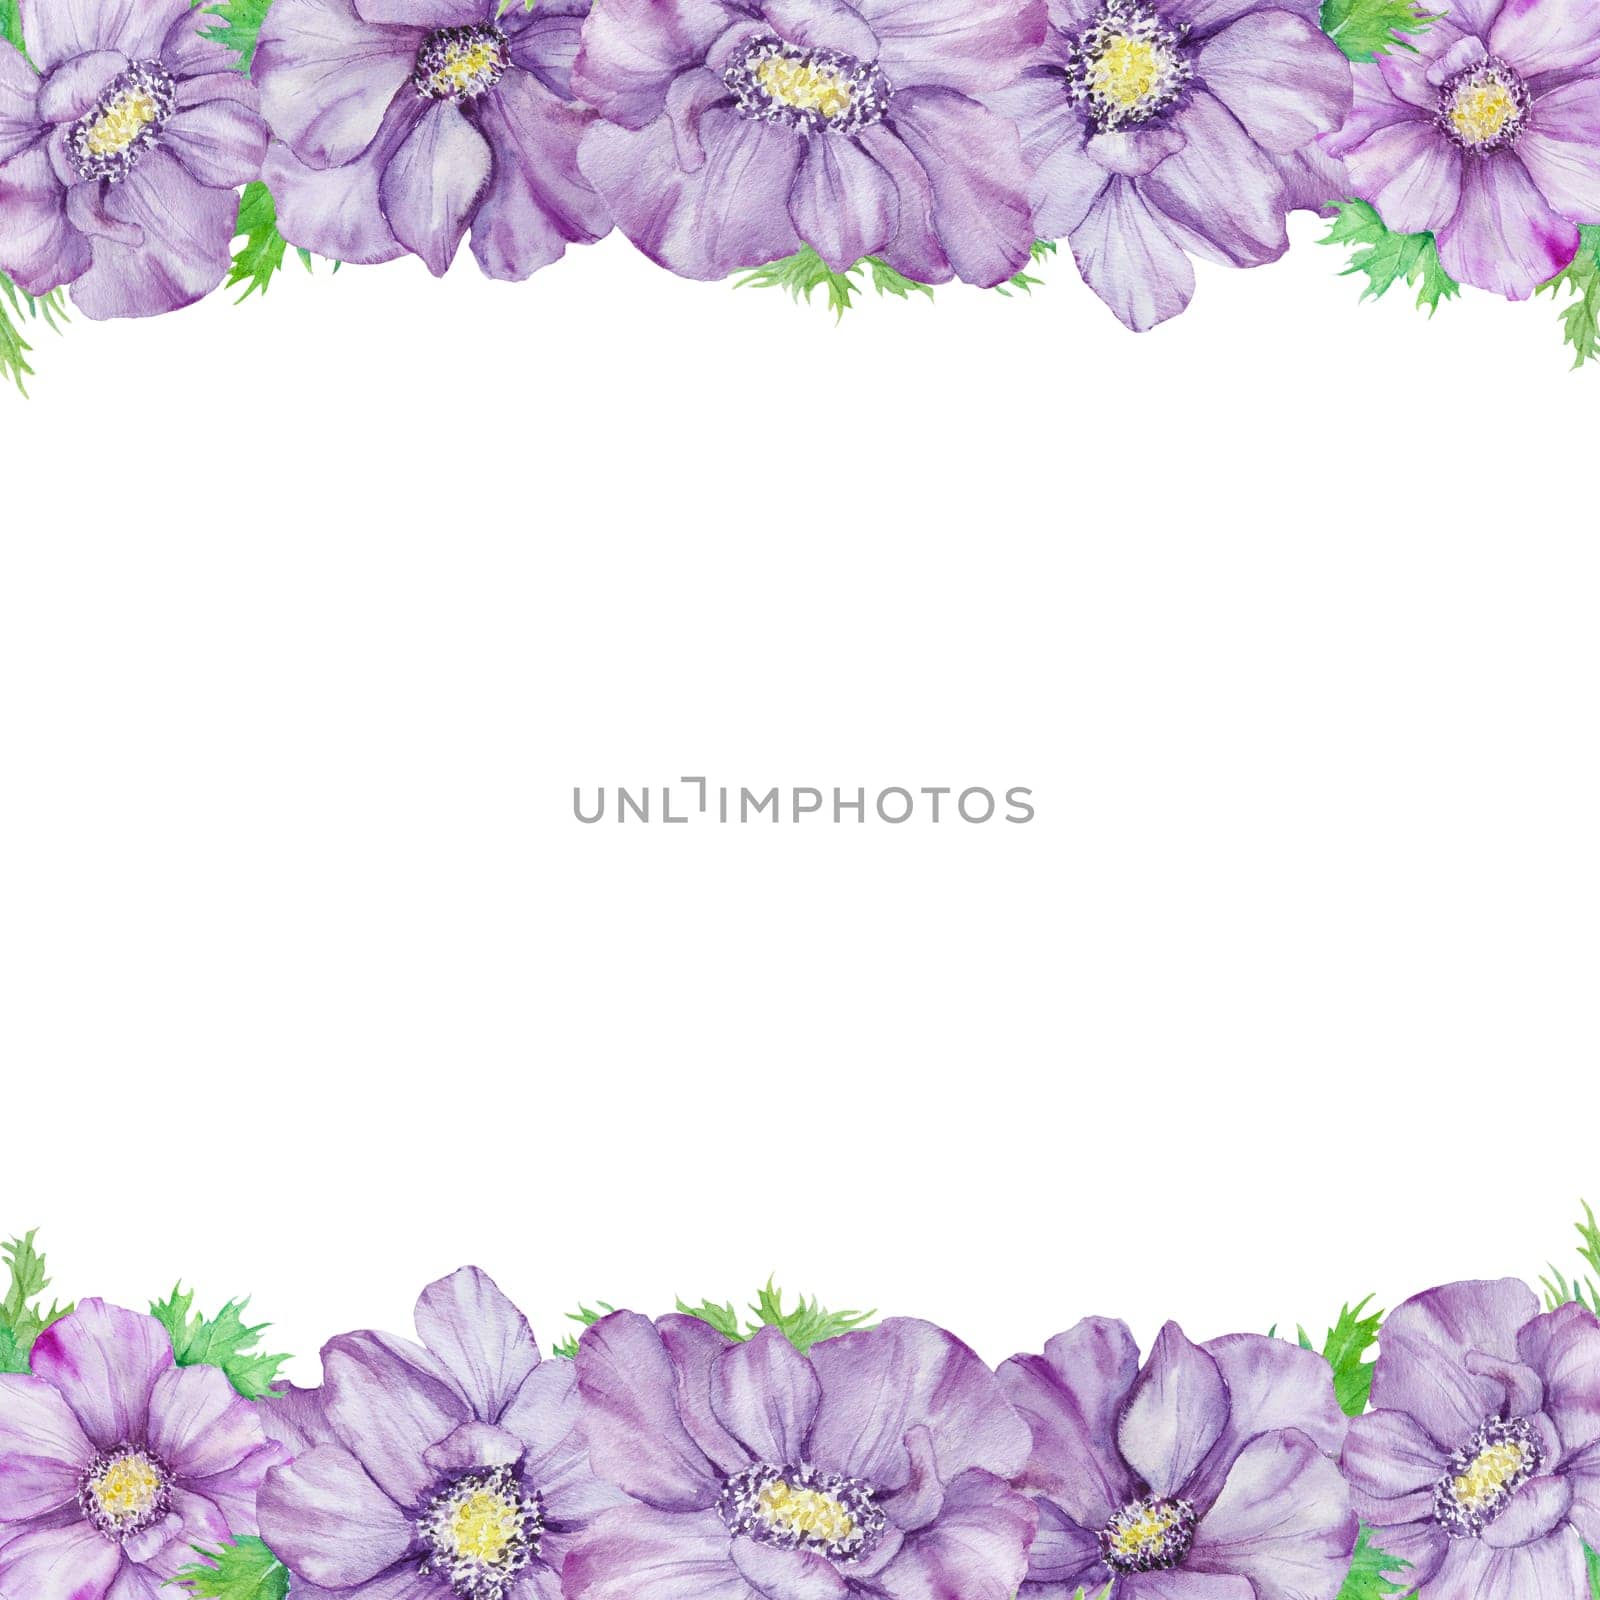 Watercolor hand drawn border of purple anemones with green leaves isolated on white background. by florainlove_art